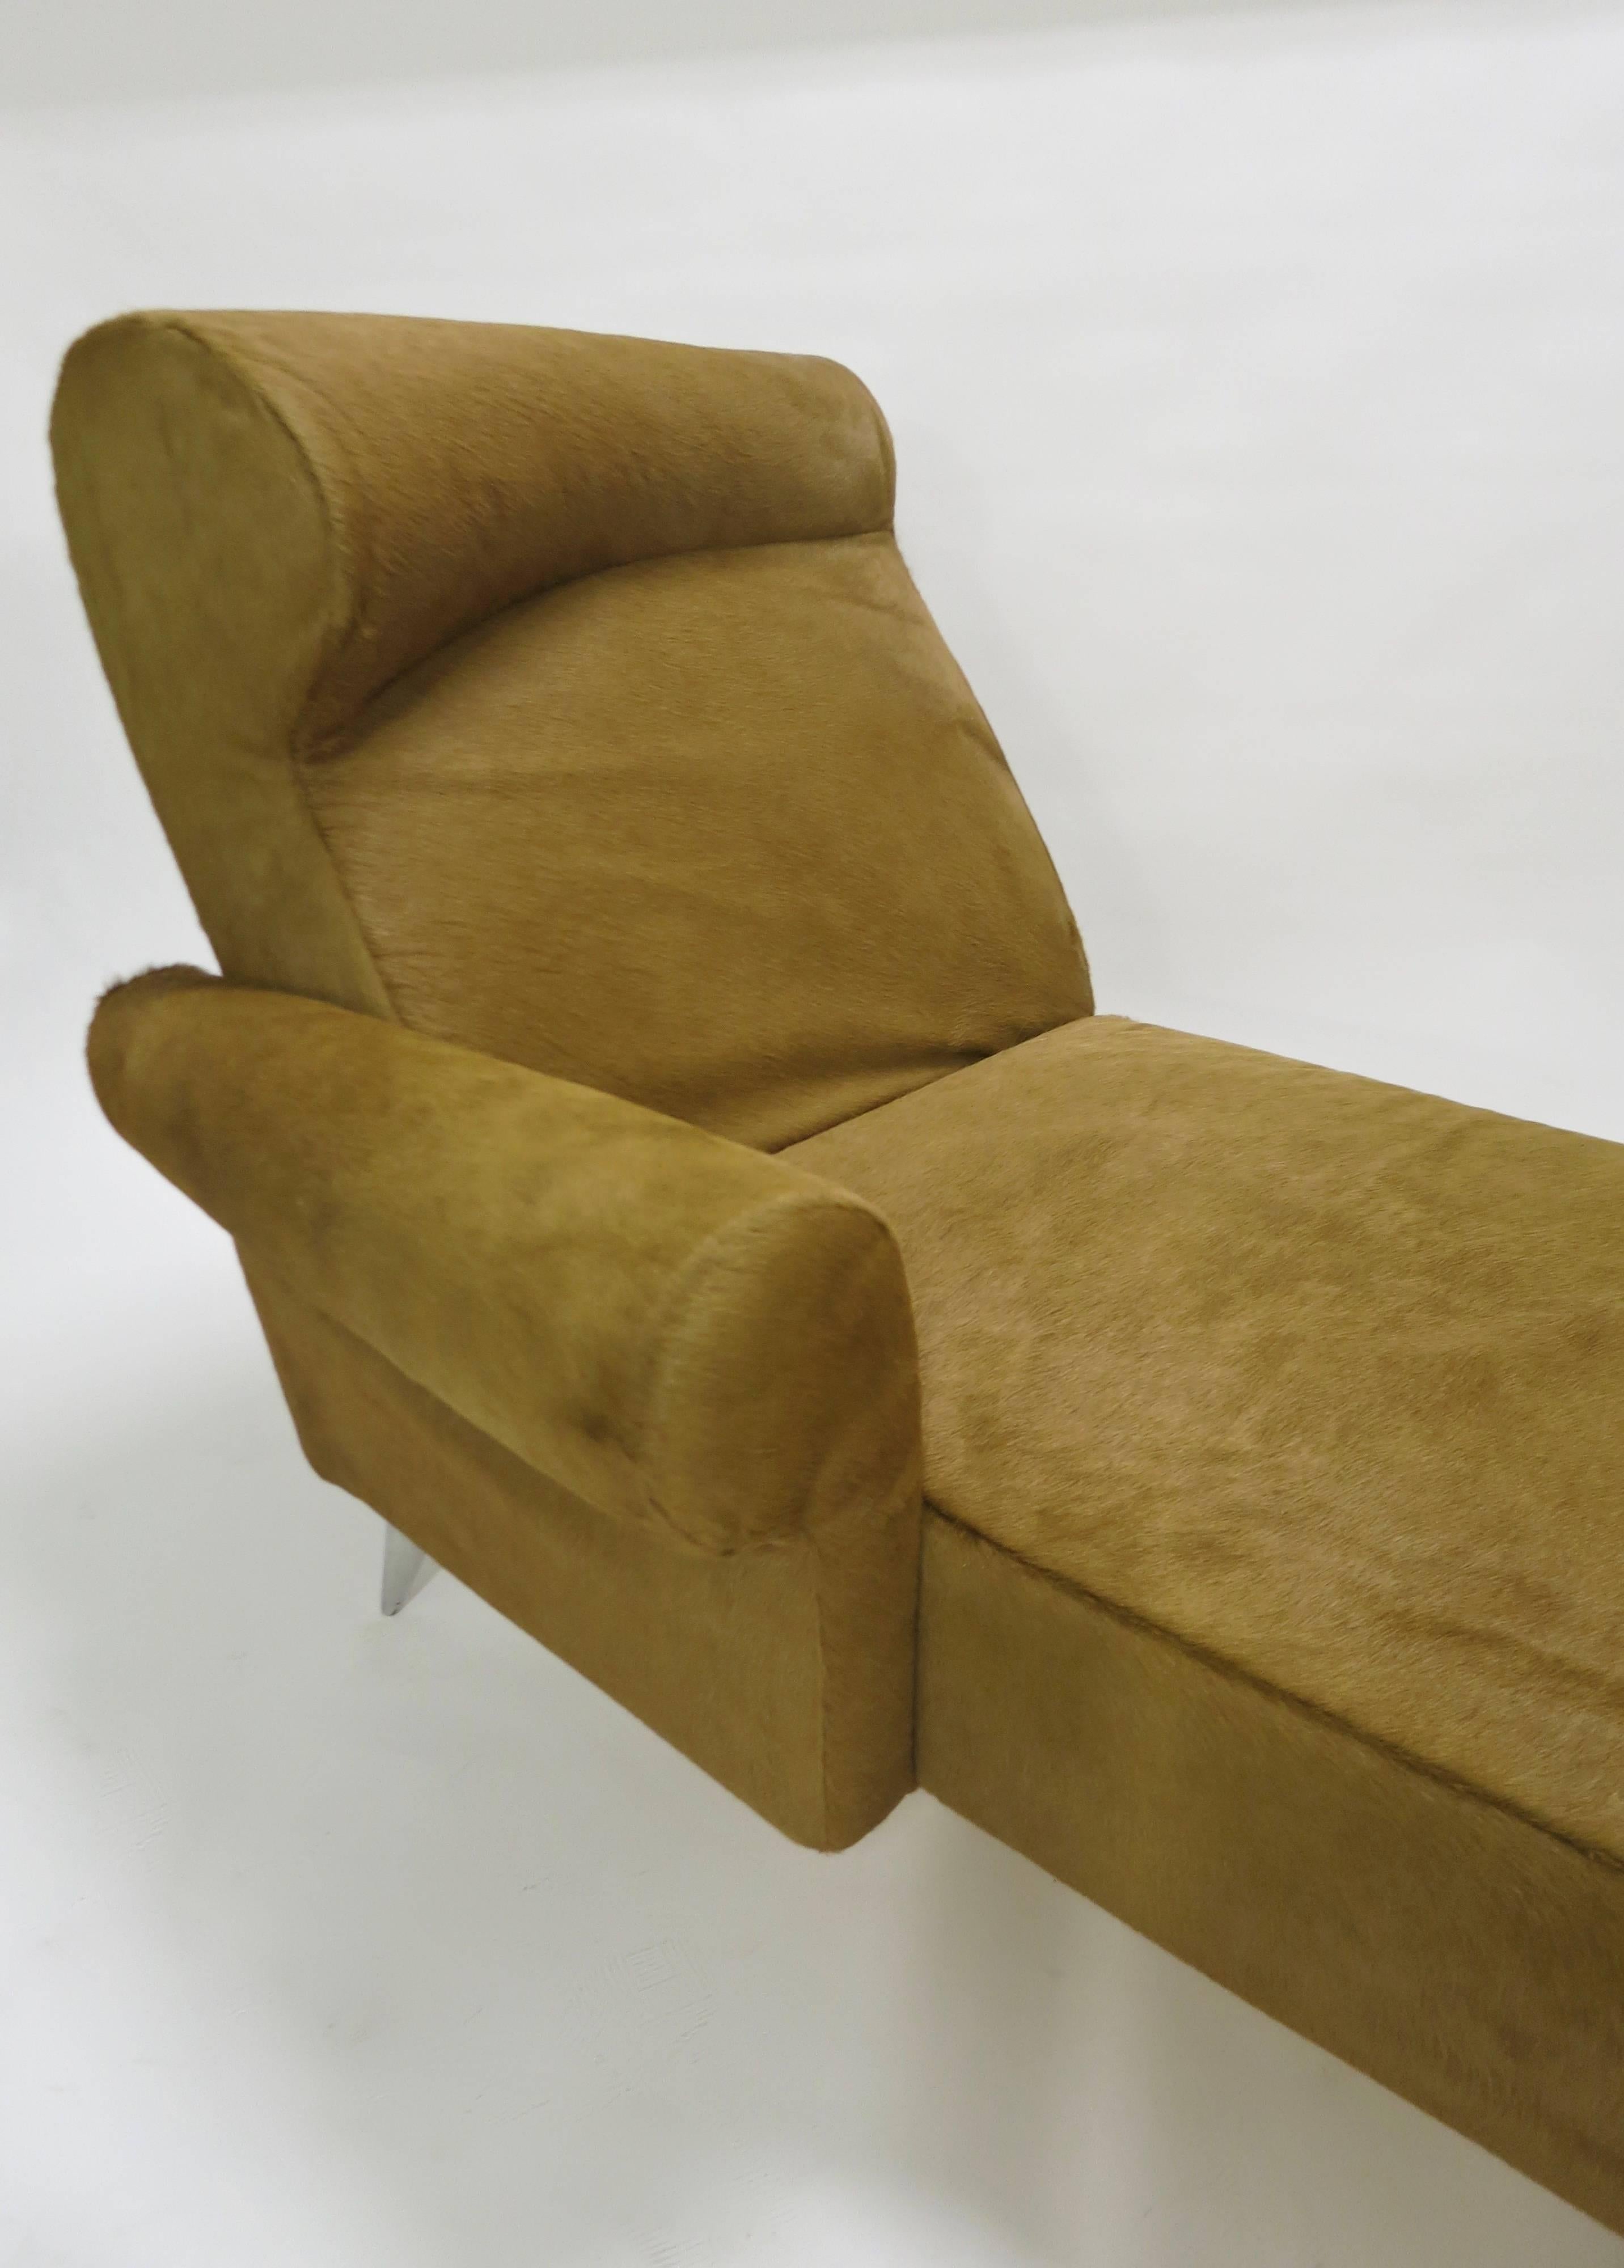 Single arm chaise longue designed by Philippe Starck and Manufactured in Italy by Driade. The chaise has the original muslin over polyurethane padding covered in long haired cowhide that is detachable and four polished cast aluminum legs.